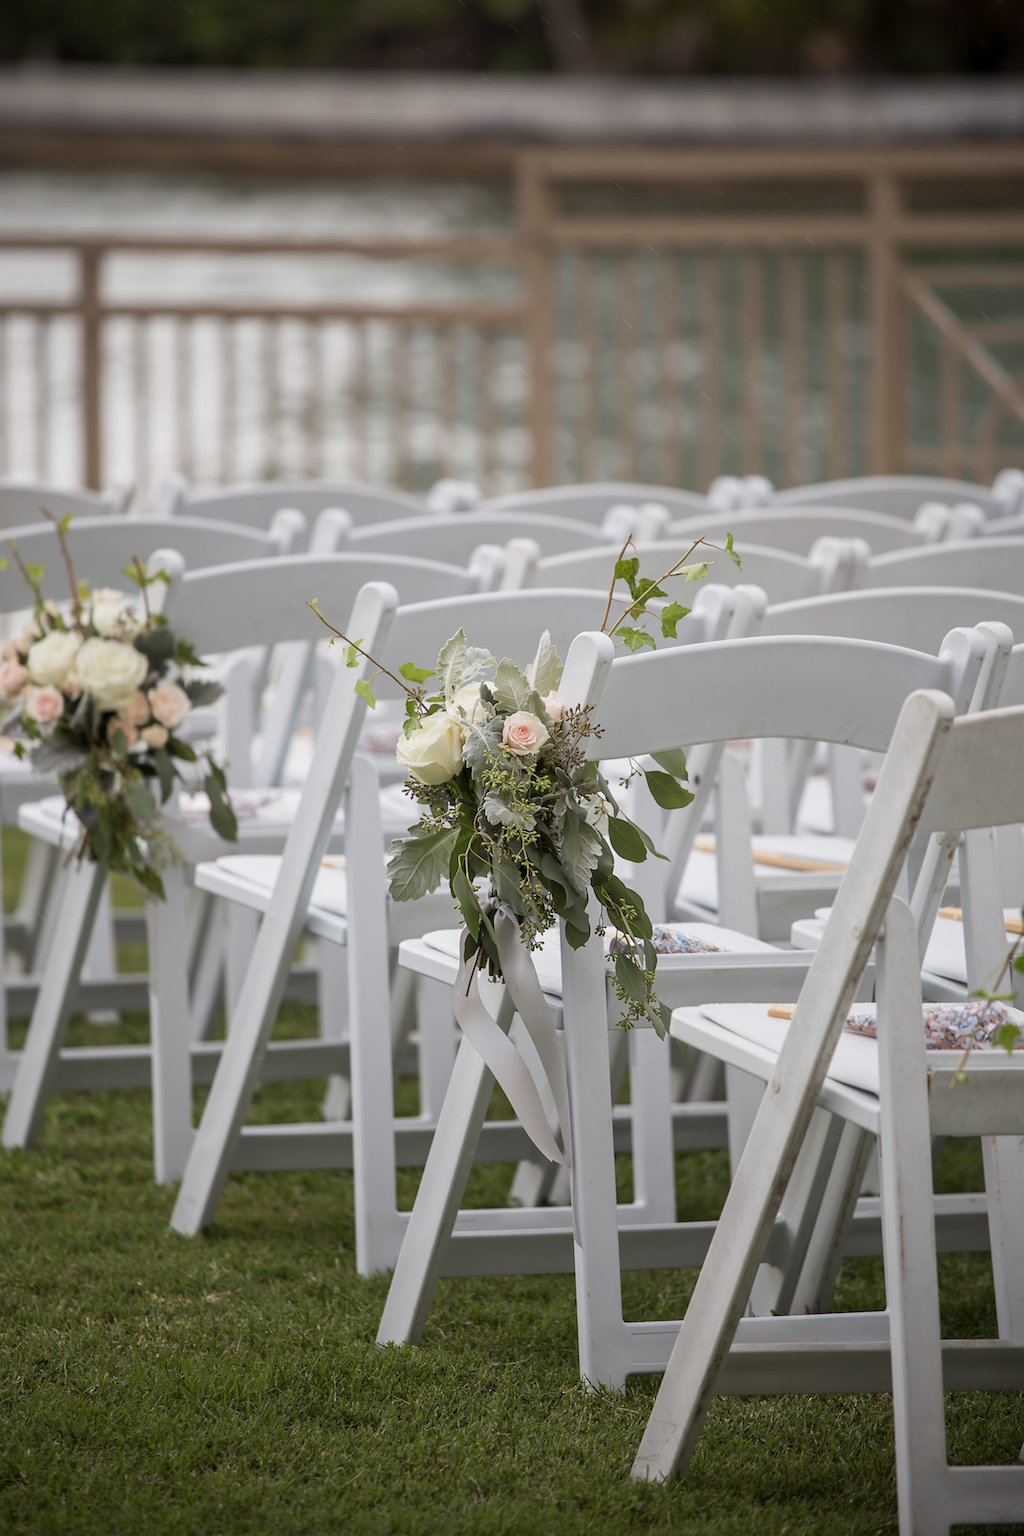 Outdoor Waterfront Garden Wedding Ceremony with Folding Chairs and White Rose, Peach Floral, and Greenery Flowers